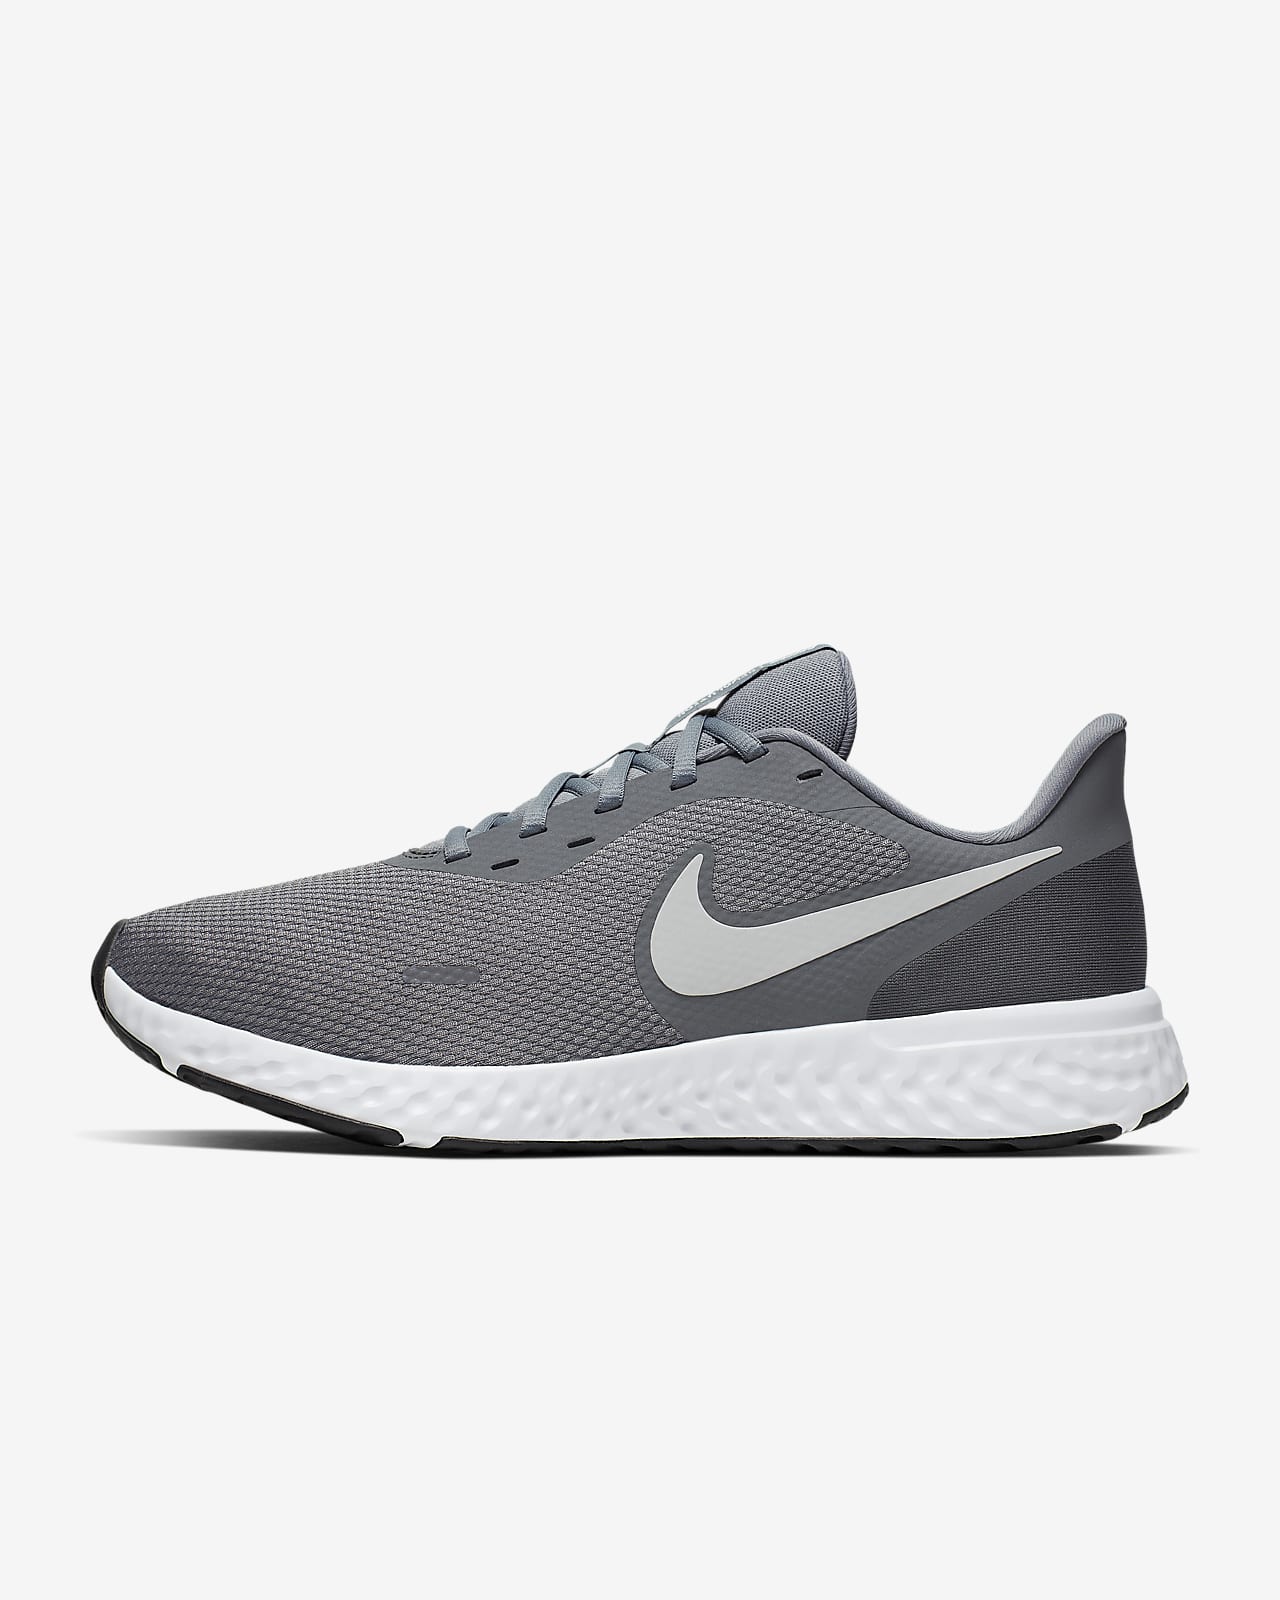 blue and grey nike revolution 2 running shoes